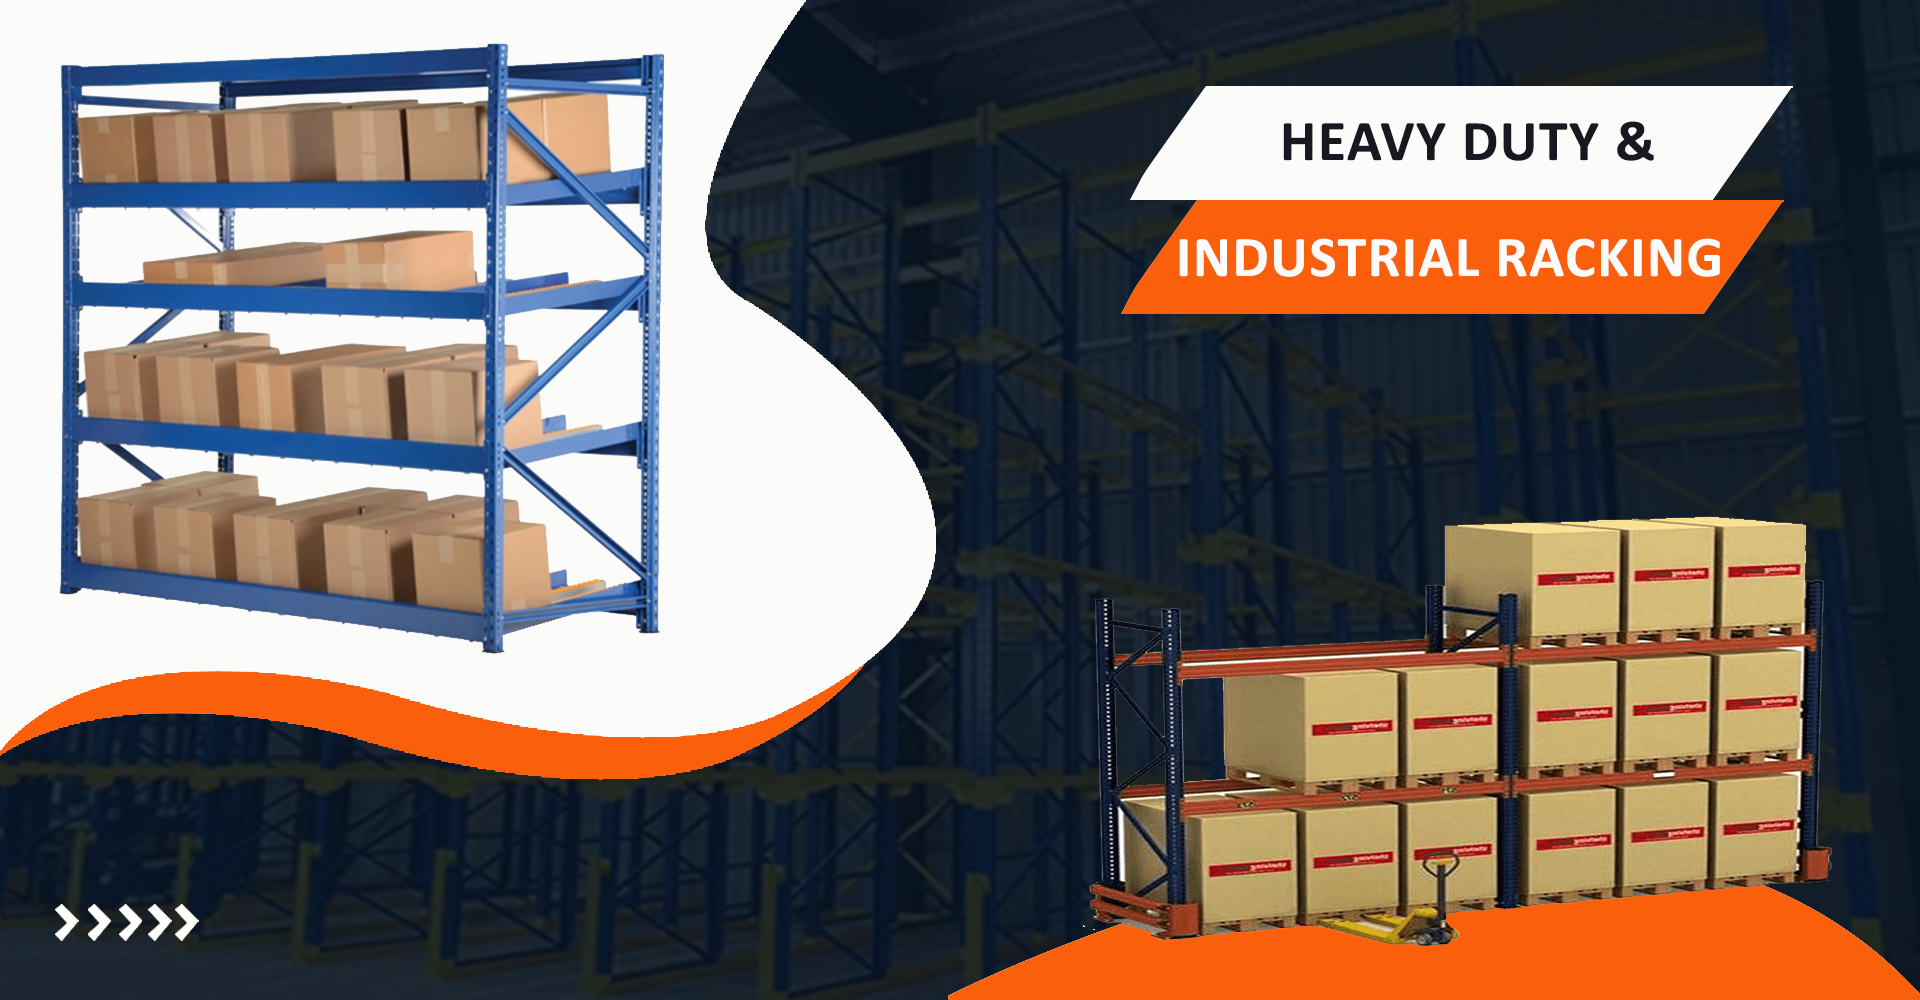 Heavy Duty Racking manufacturers